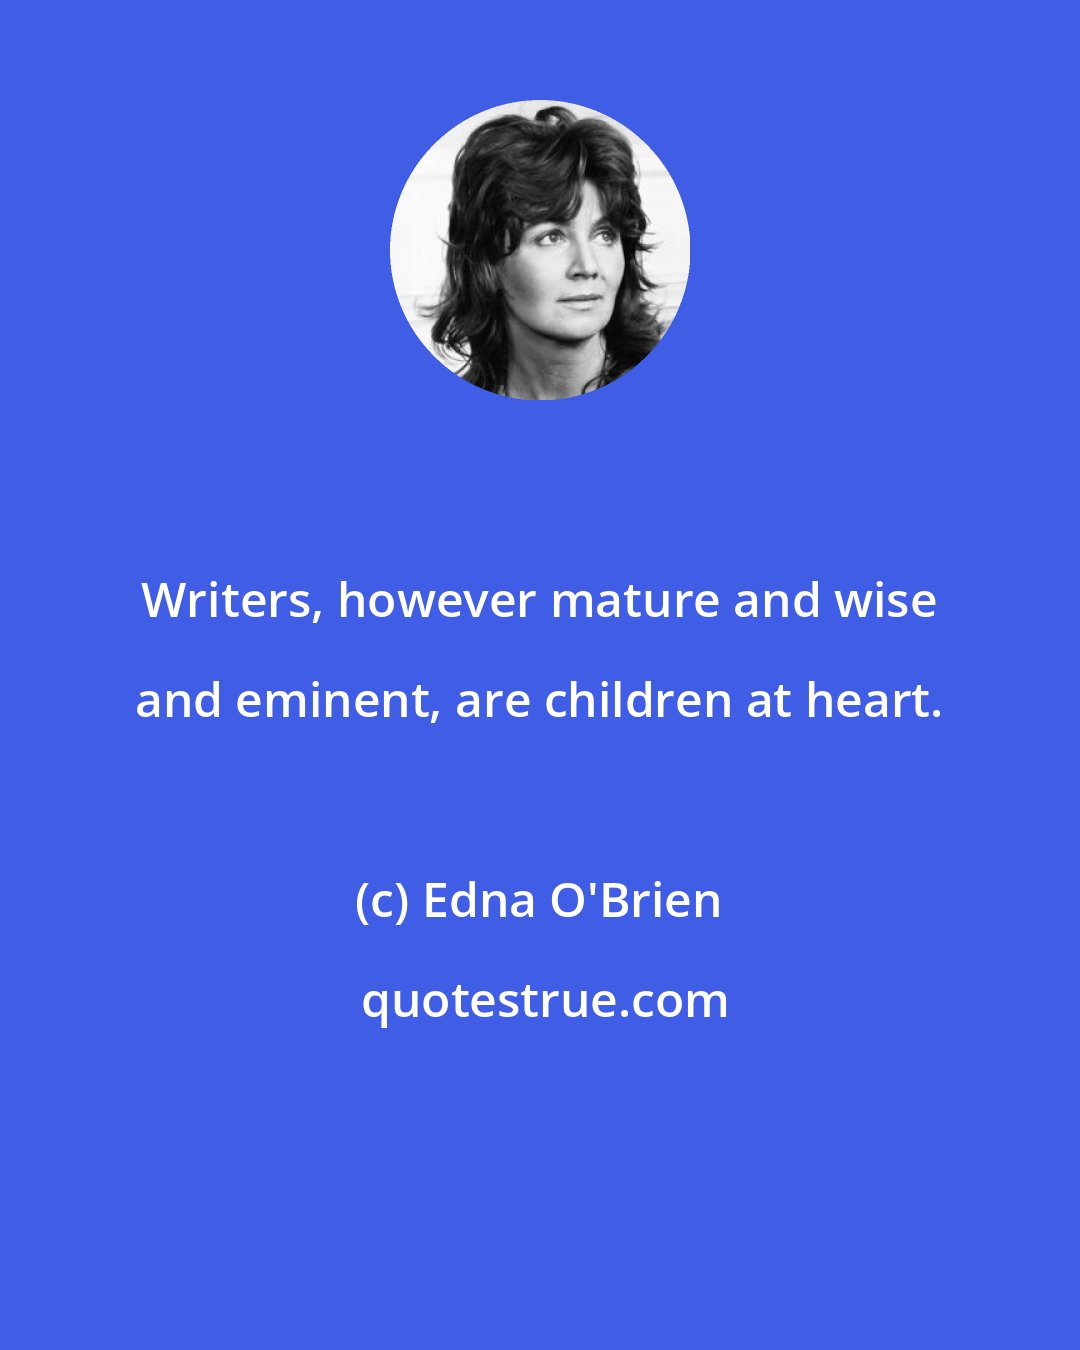 Edna O'Brien: Writers, however mature and wise and eminent, are children at heart.